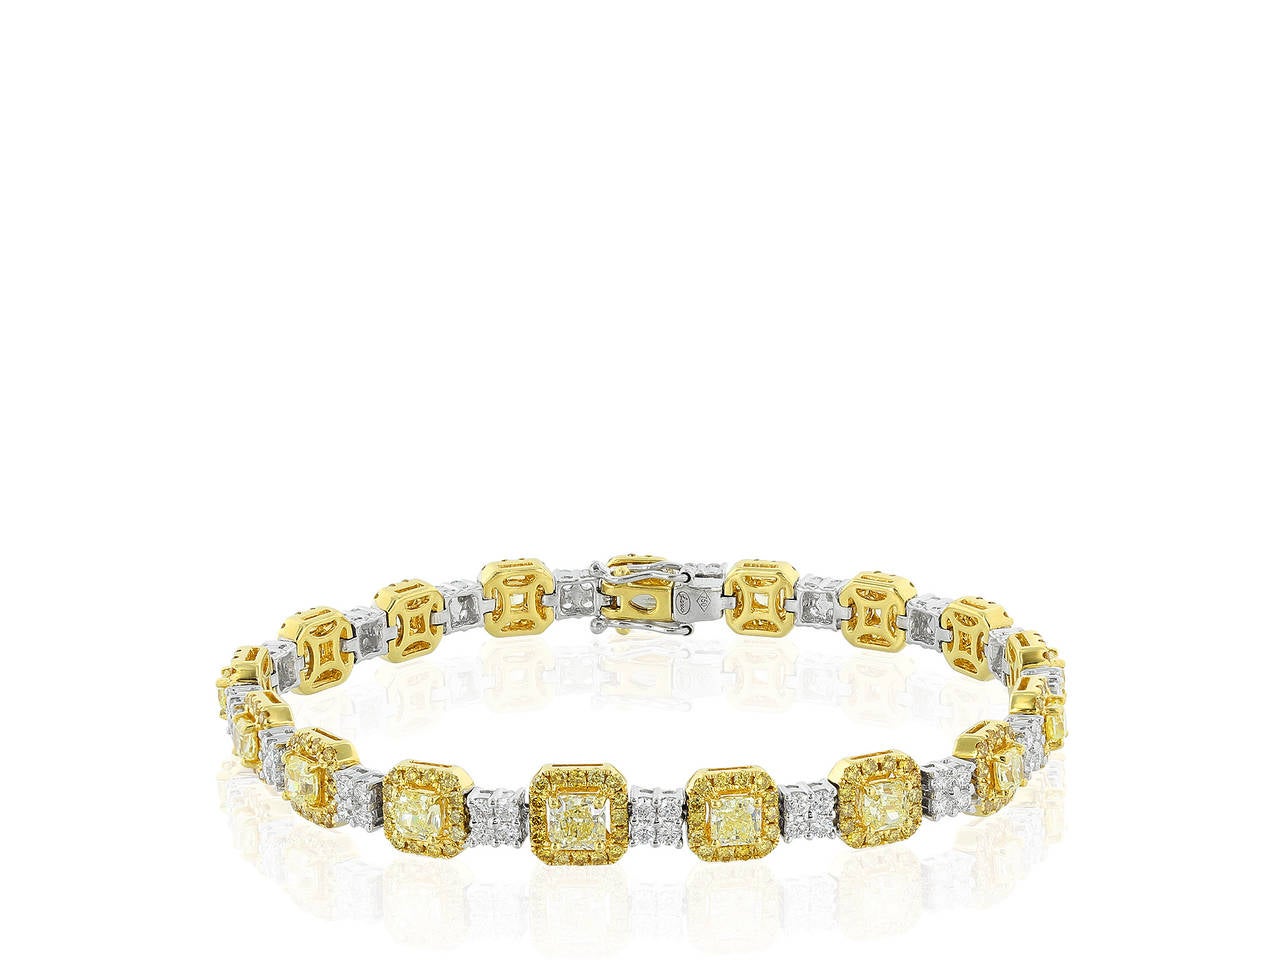 Two tone 18 karat yellow and white gold flexible bracelet consisting of 1.39 carats total weight of colorless round brilliant cut diamonds, 1.75 carats total weight of round brilliant cut canary diamonds and 3.39 carats total weight of radiant cut